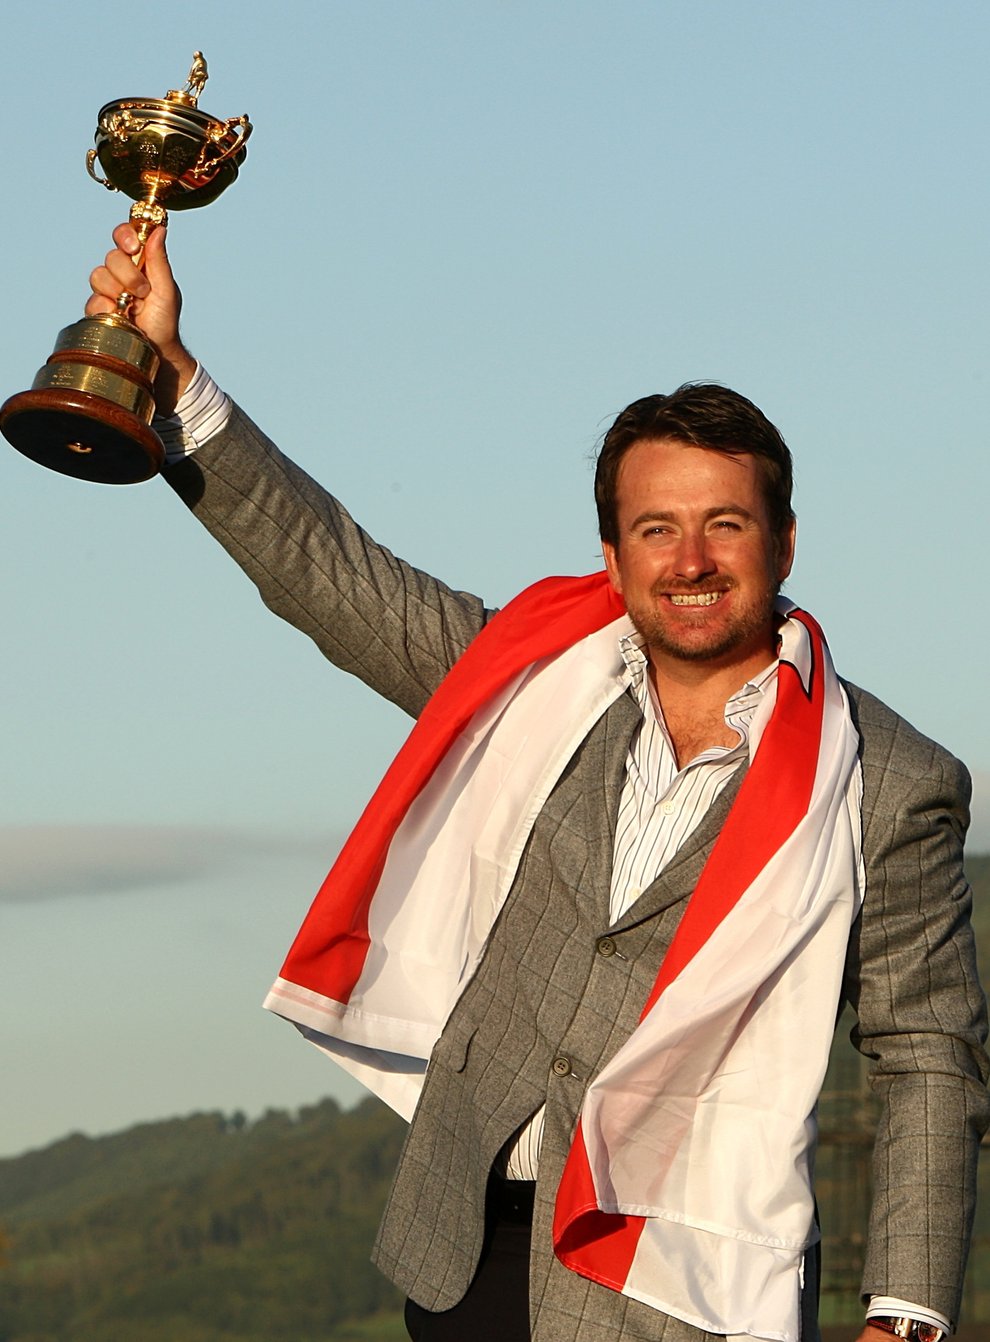 Graeme McDowell celebrates with the Ryder Cup trophy after Europe’s win at Celtic Manor in 2010 (Lynne Cameron/PA)